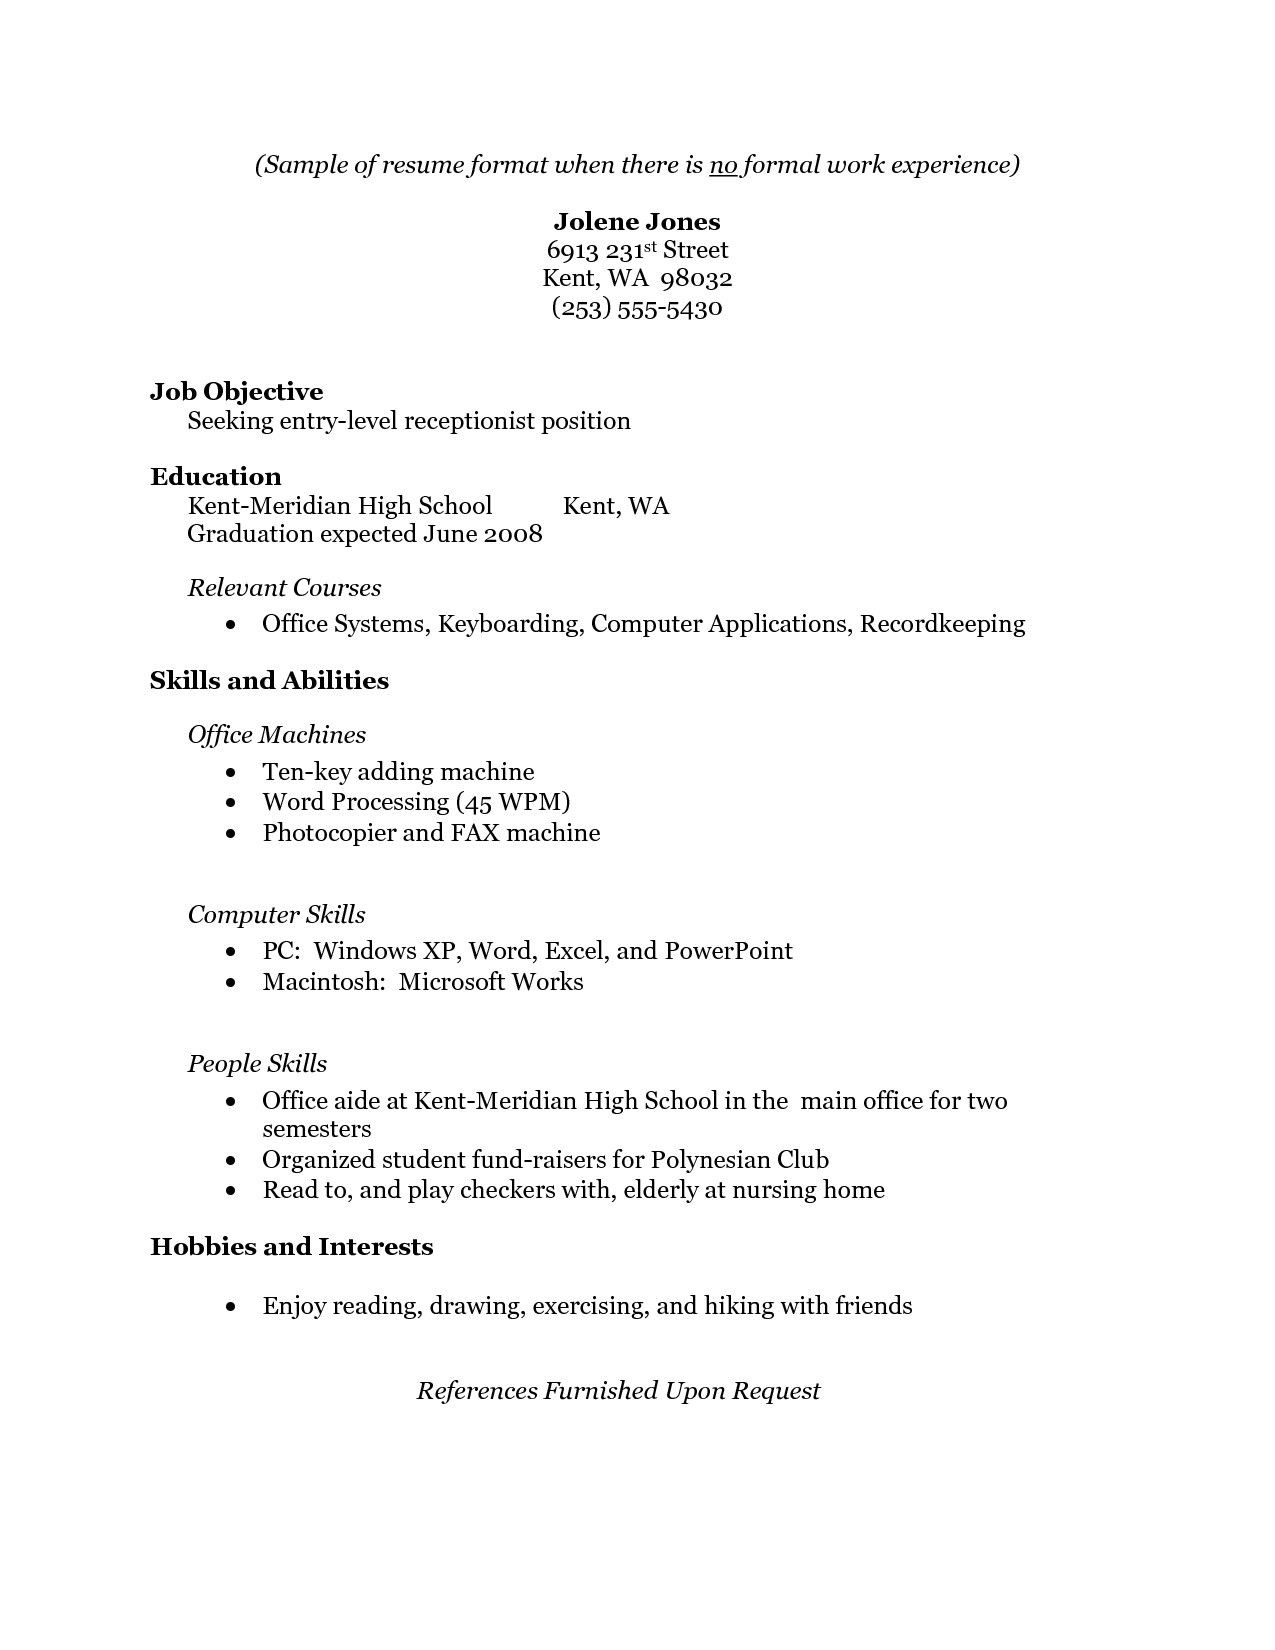 Basic Resume Template No Work Experience Free Resume Templates No Work Experience #experience …